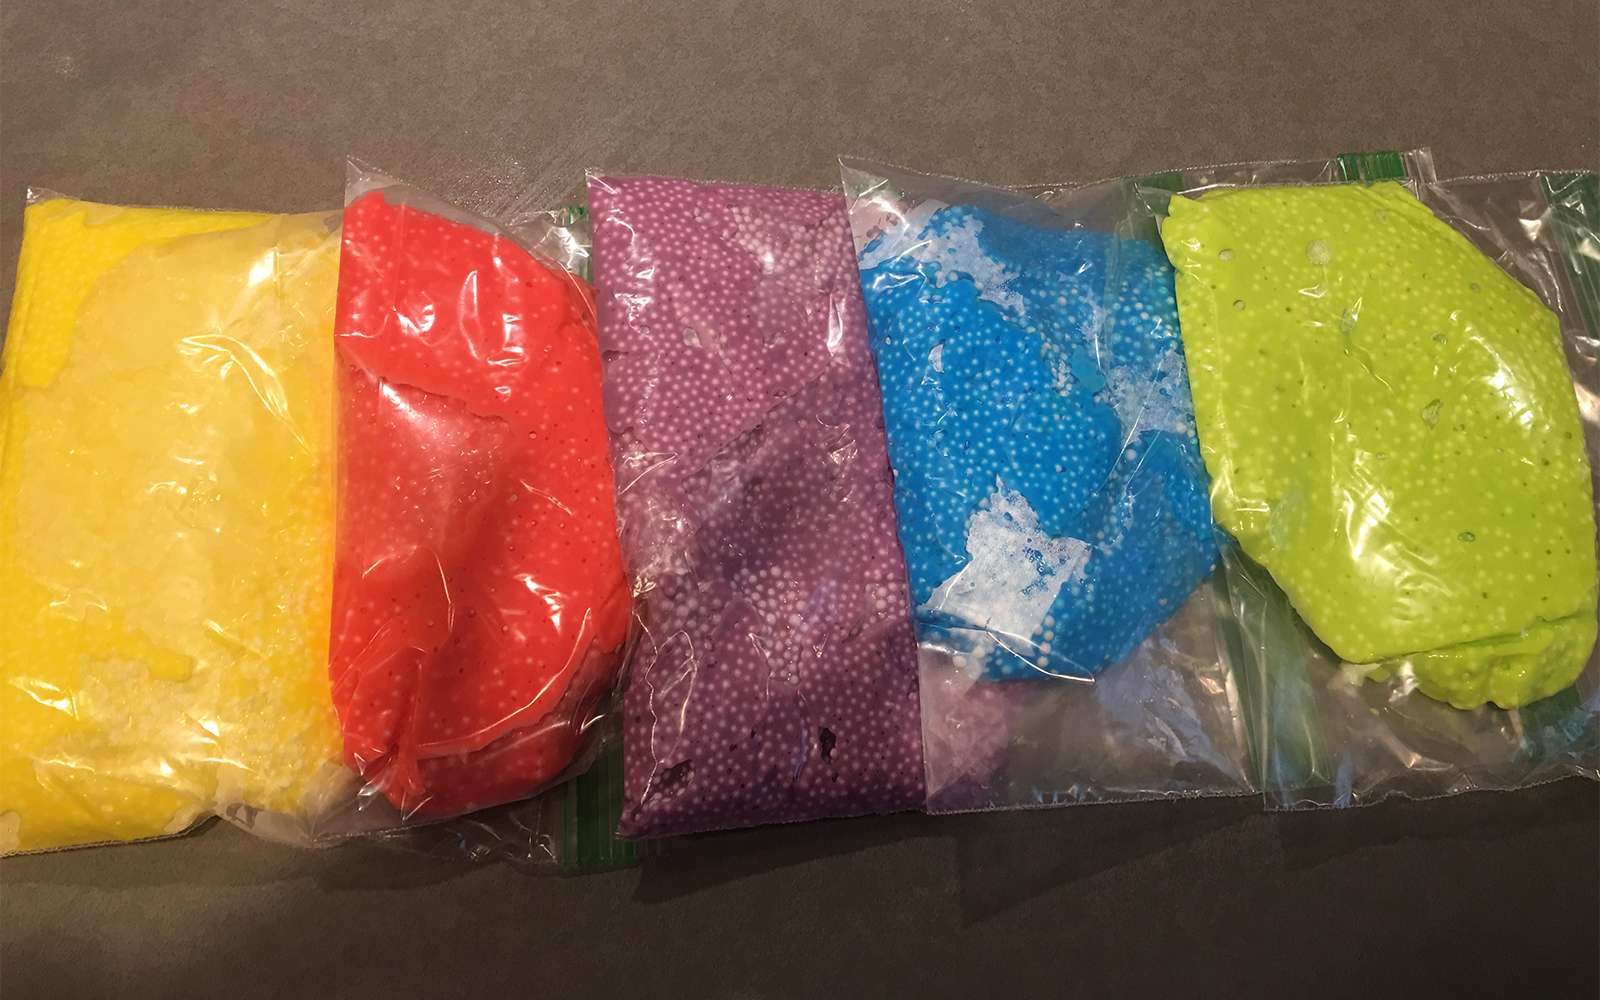 bags of different colored homemade floam